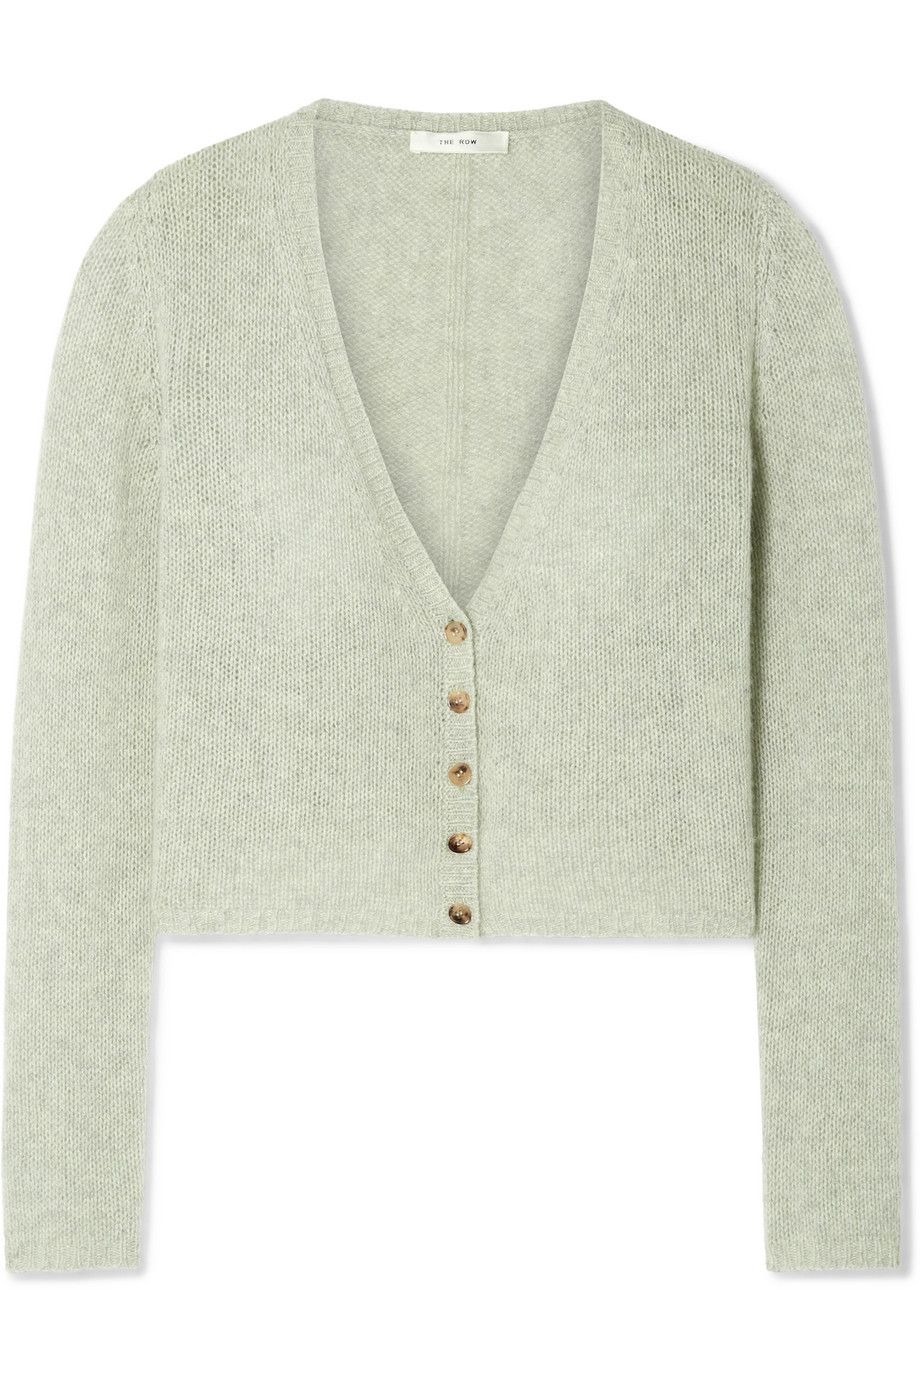 Shop it: The Cropped Cardigan